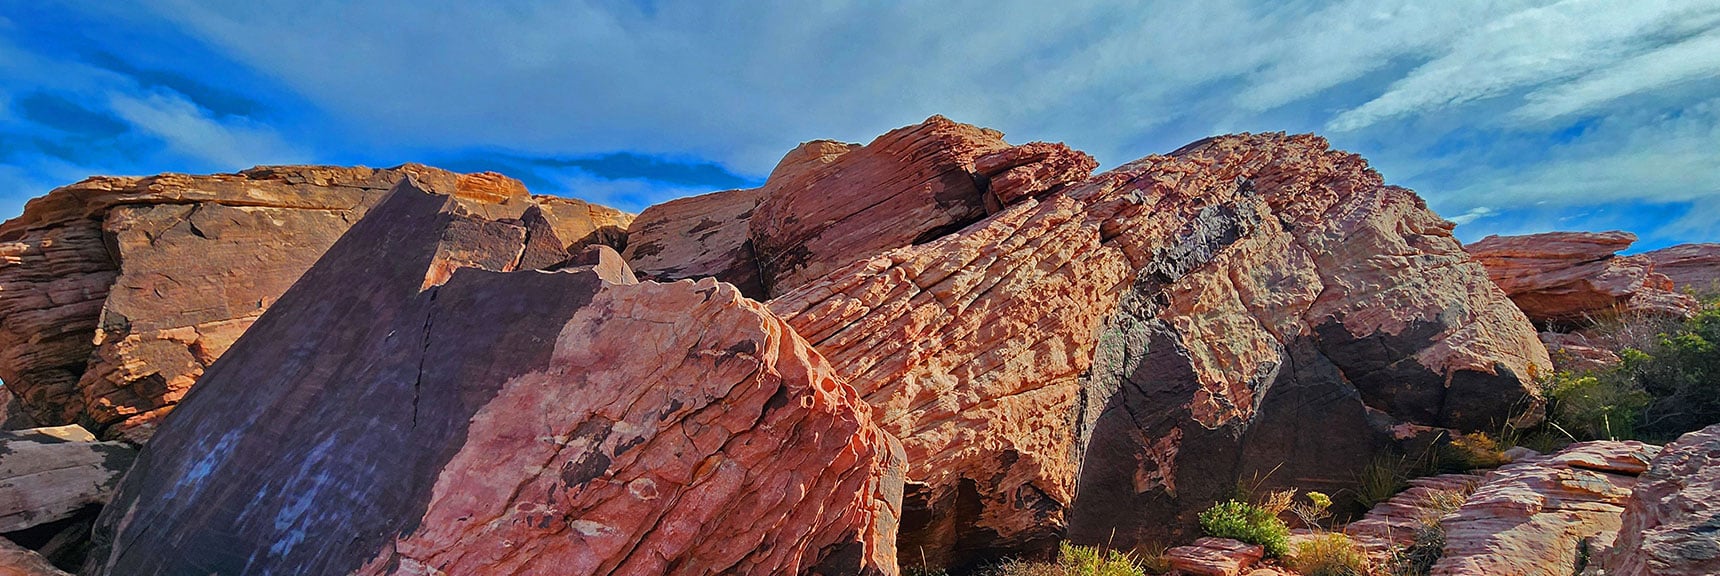 These Summit Rocks Make a Great Resting Place with a Spectacular 360-Degree View | Grand Staircase | Calico Basin, Nevada